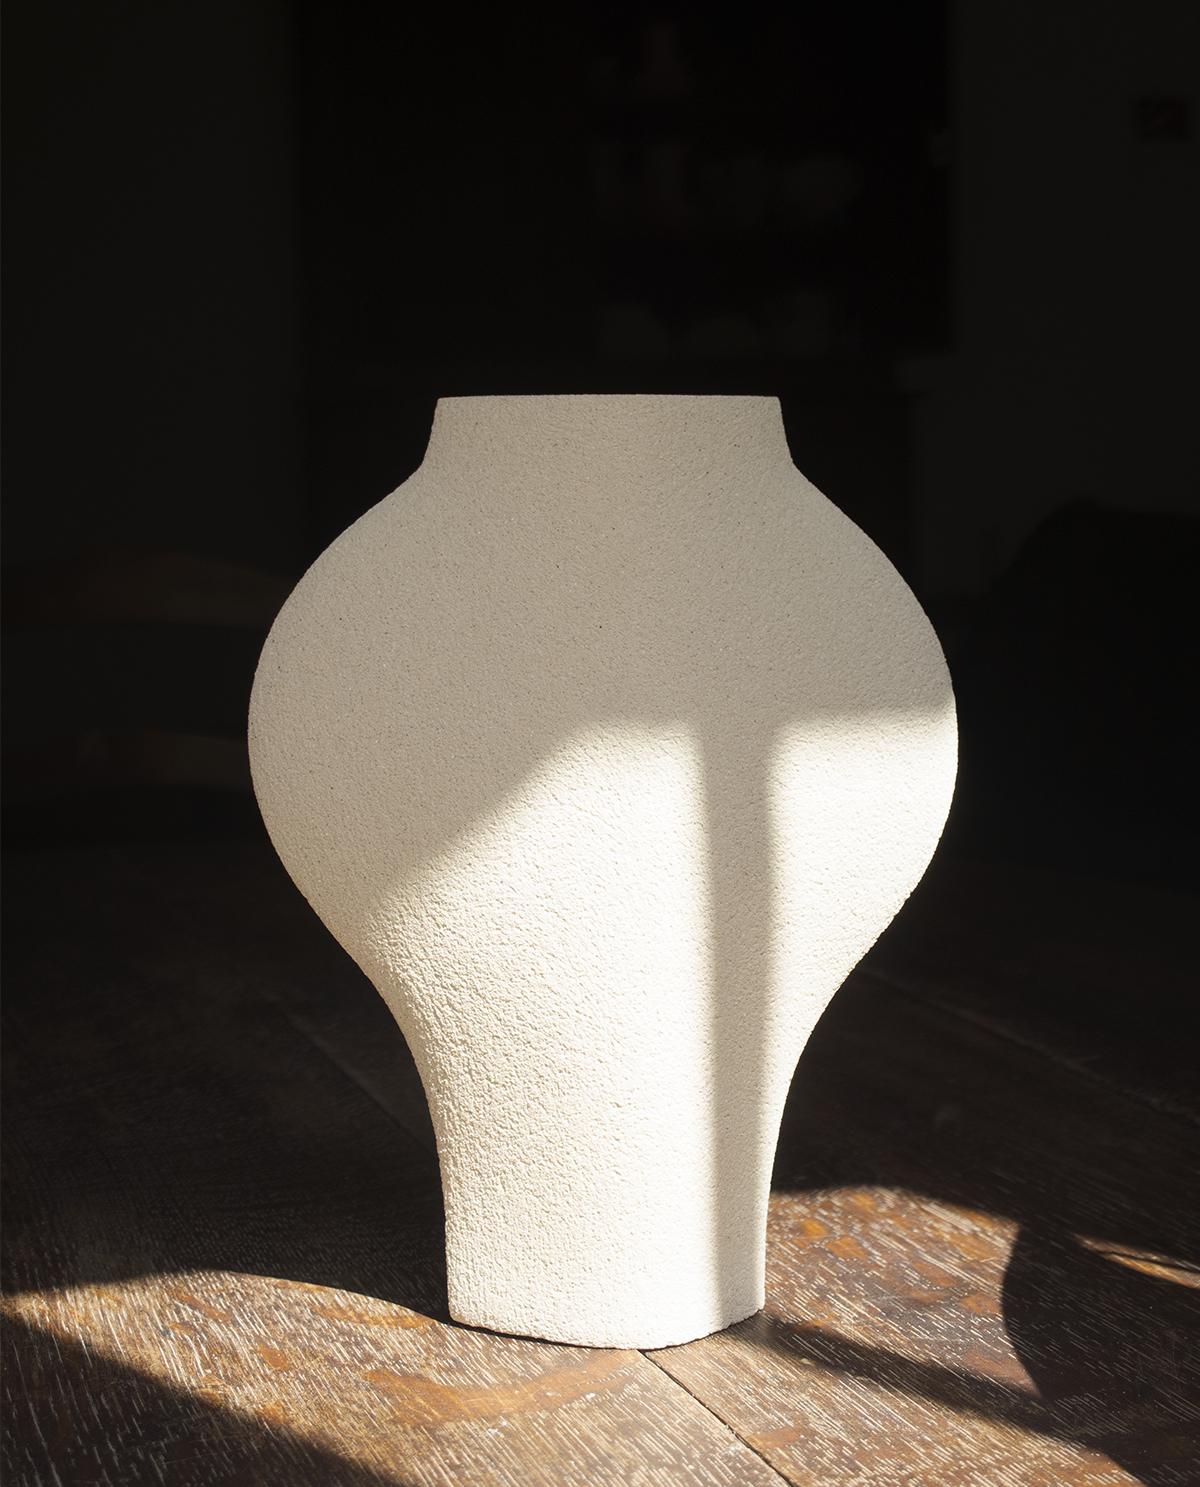 21st Century Dal Vase in White Ceramic, Hand-Crafted in France In New Condition For Sale In Marchaux-Chaudefontaine, FR